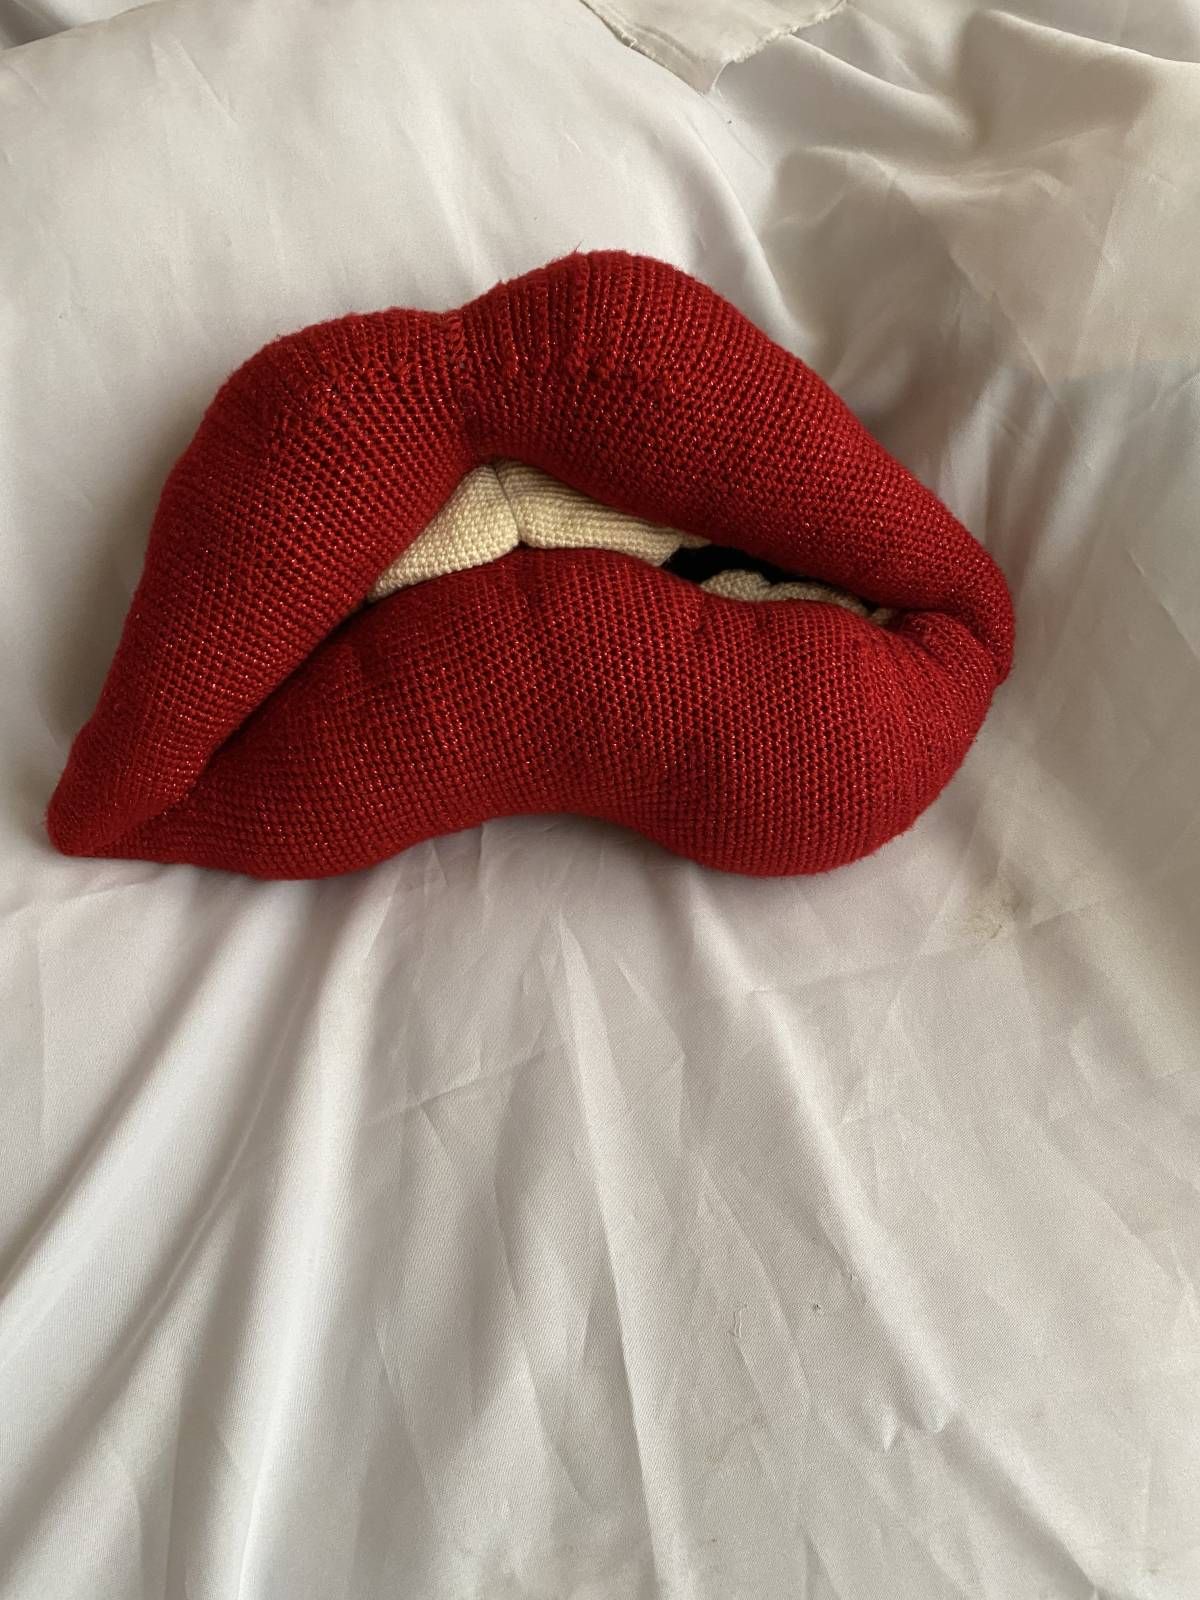 Rocky Horror Crochet Lips Pattern Review by Mandy Innes for Cottontail Whiskers